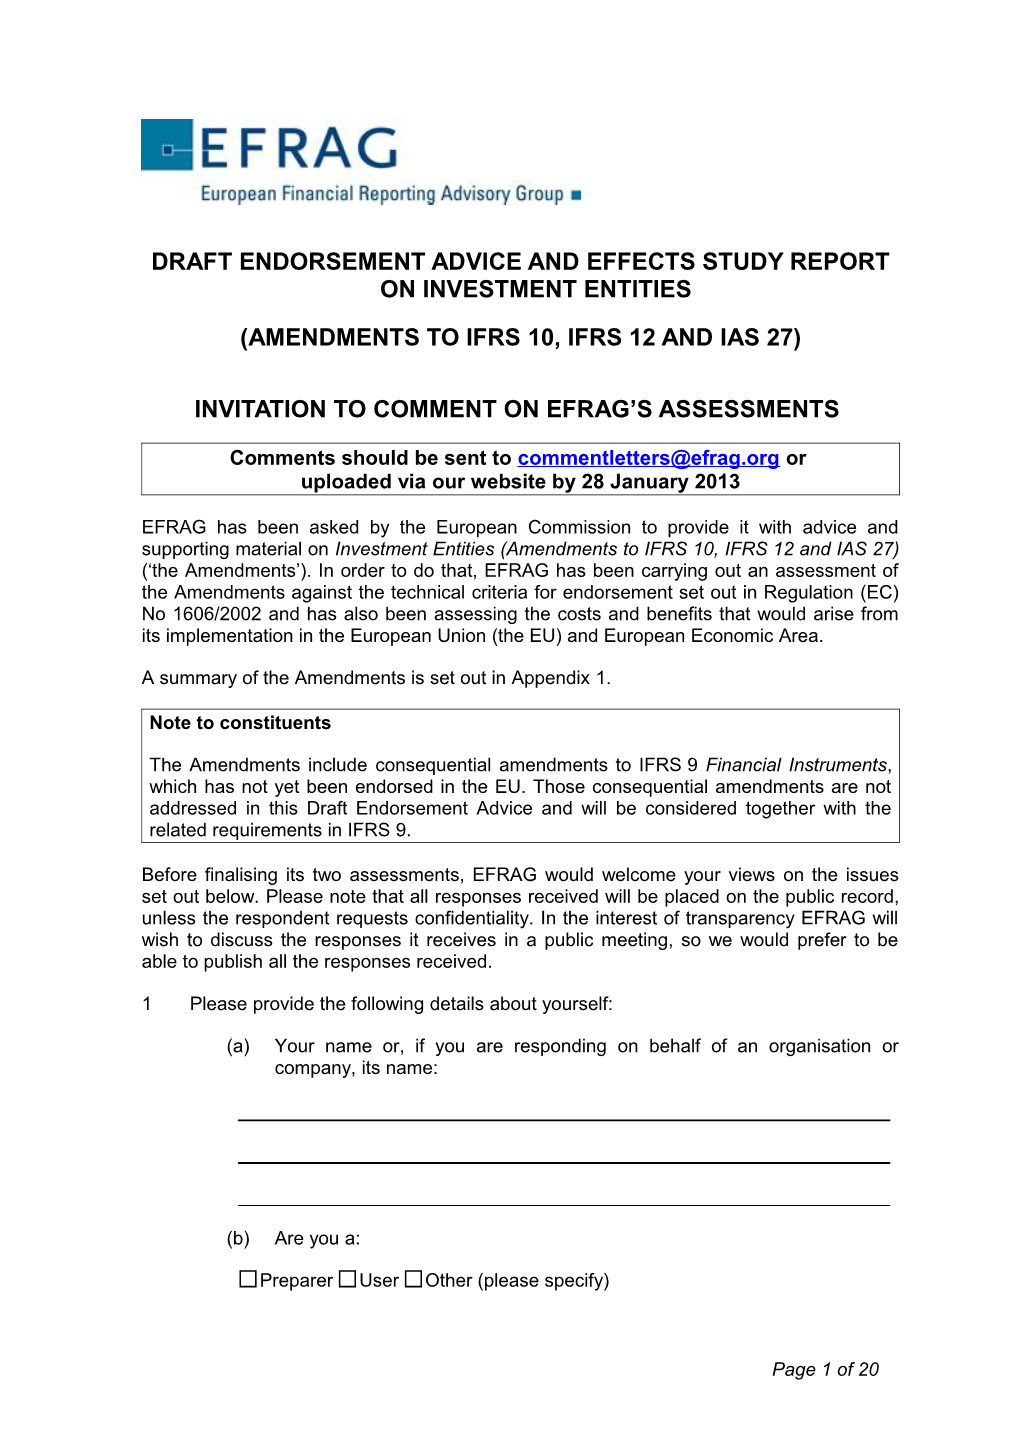 Draft Endorsement Advice and Effects Study Report on Investment Entities